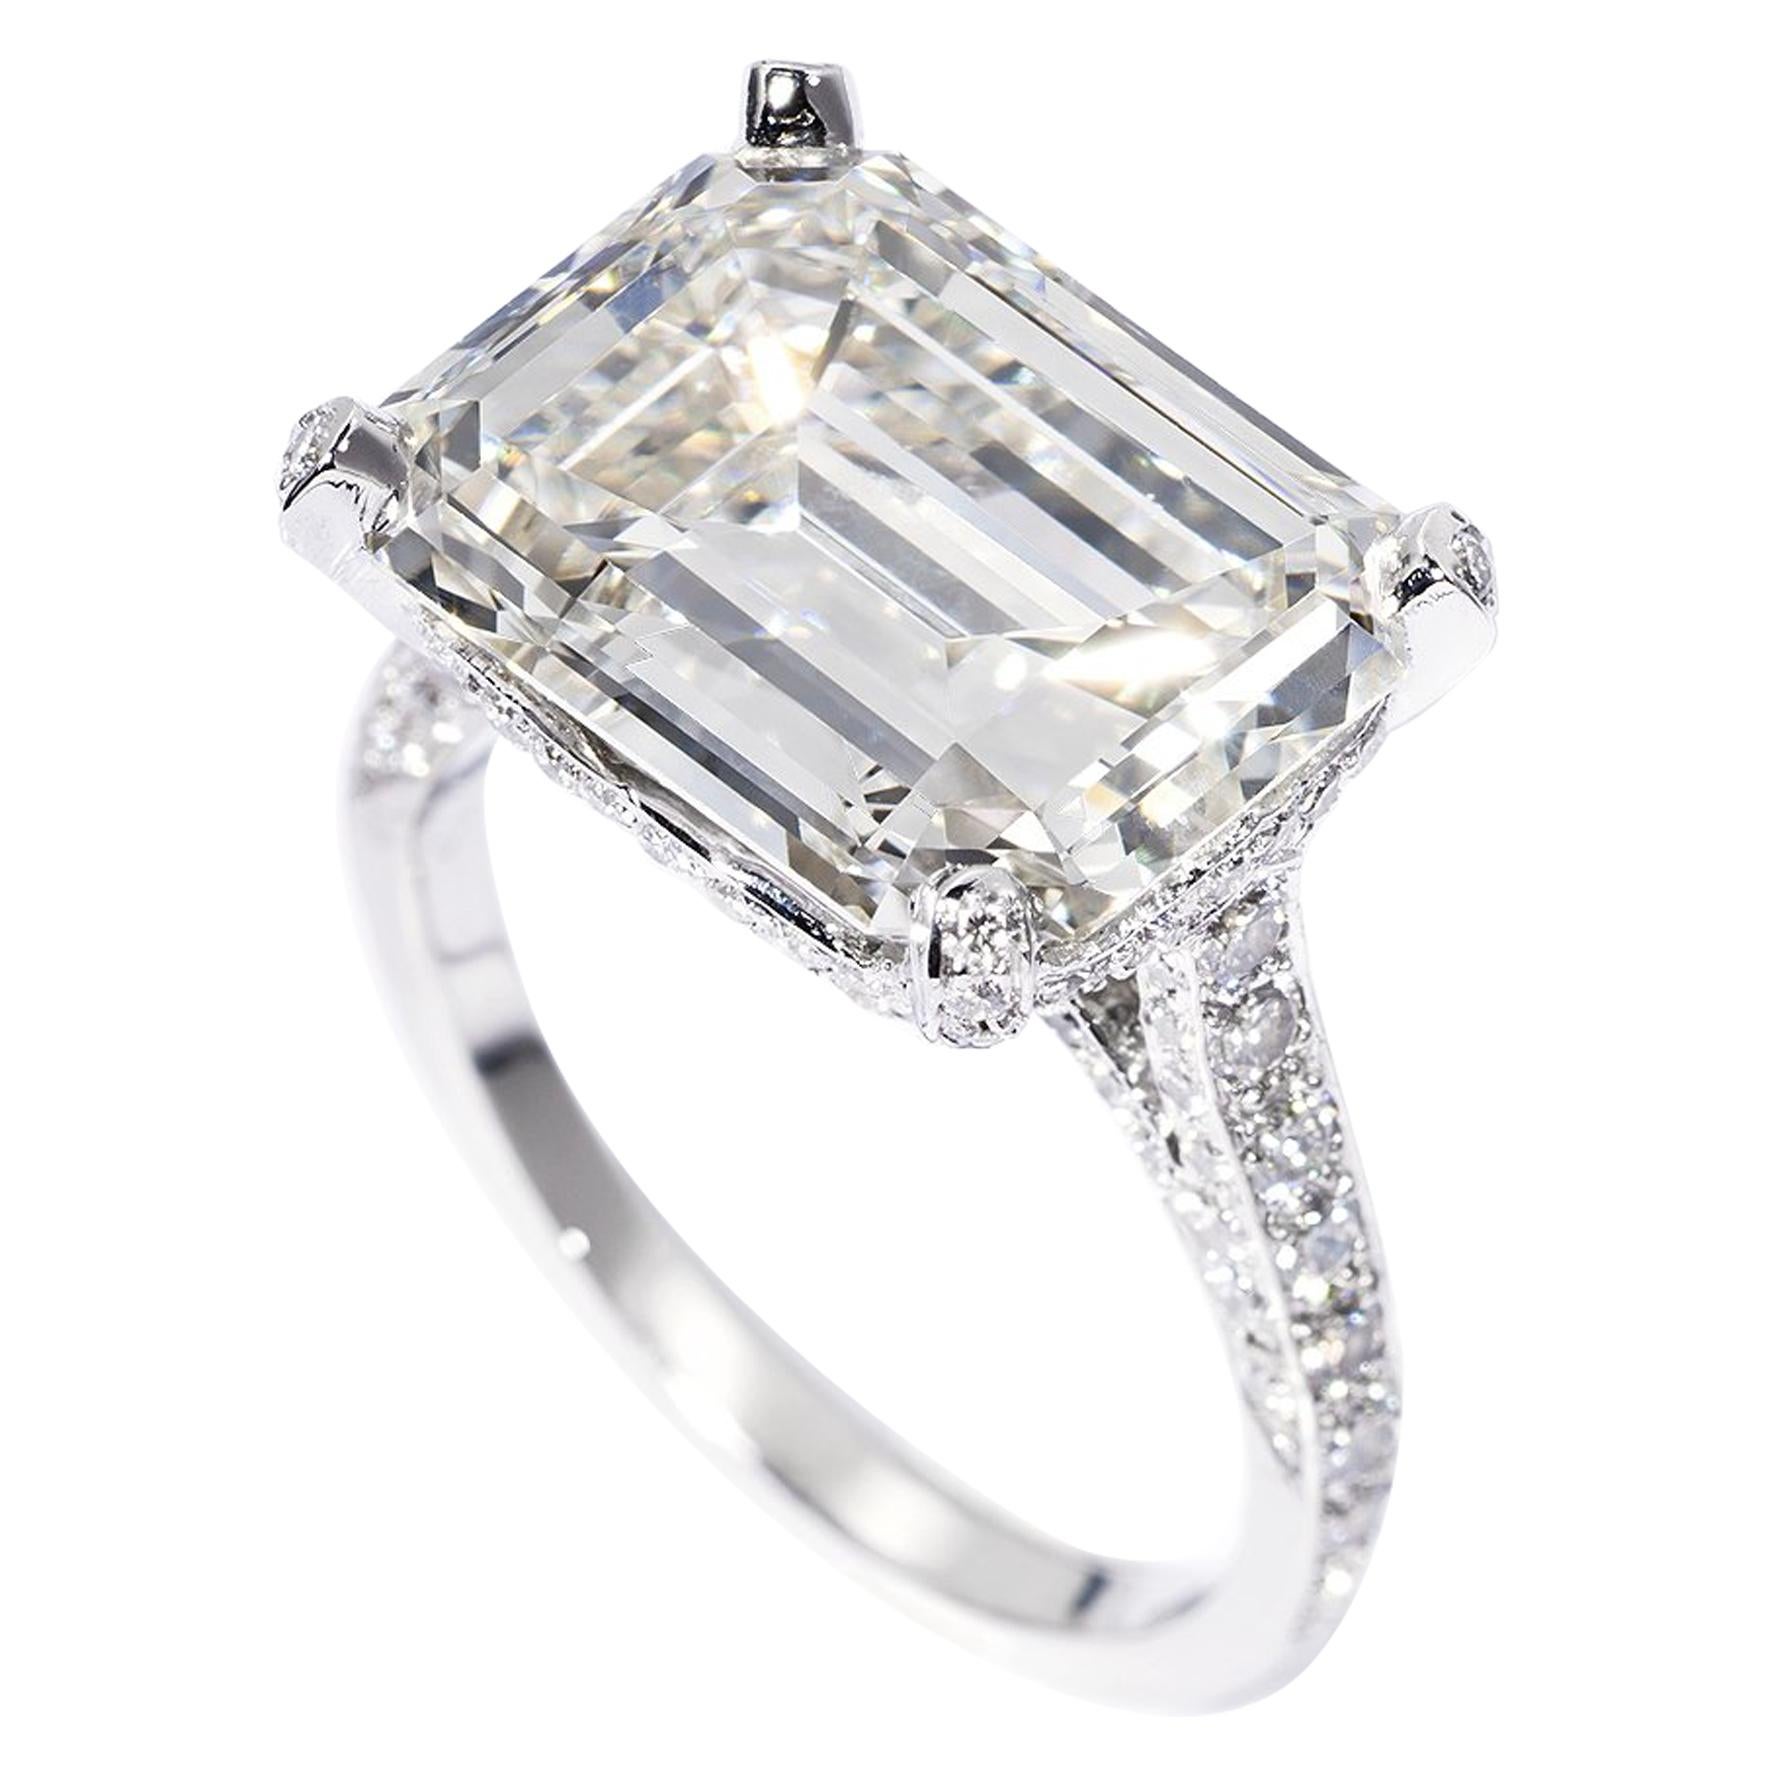 GIA Certified 6.92 Carat Emerald Cut Diamond Engagement Ring For Sale